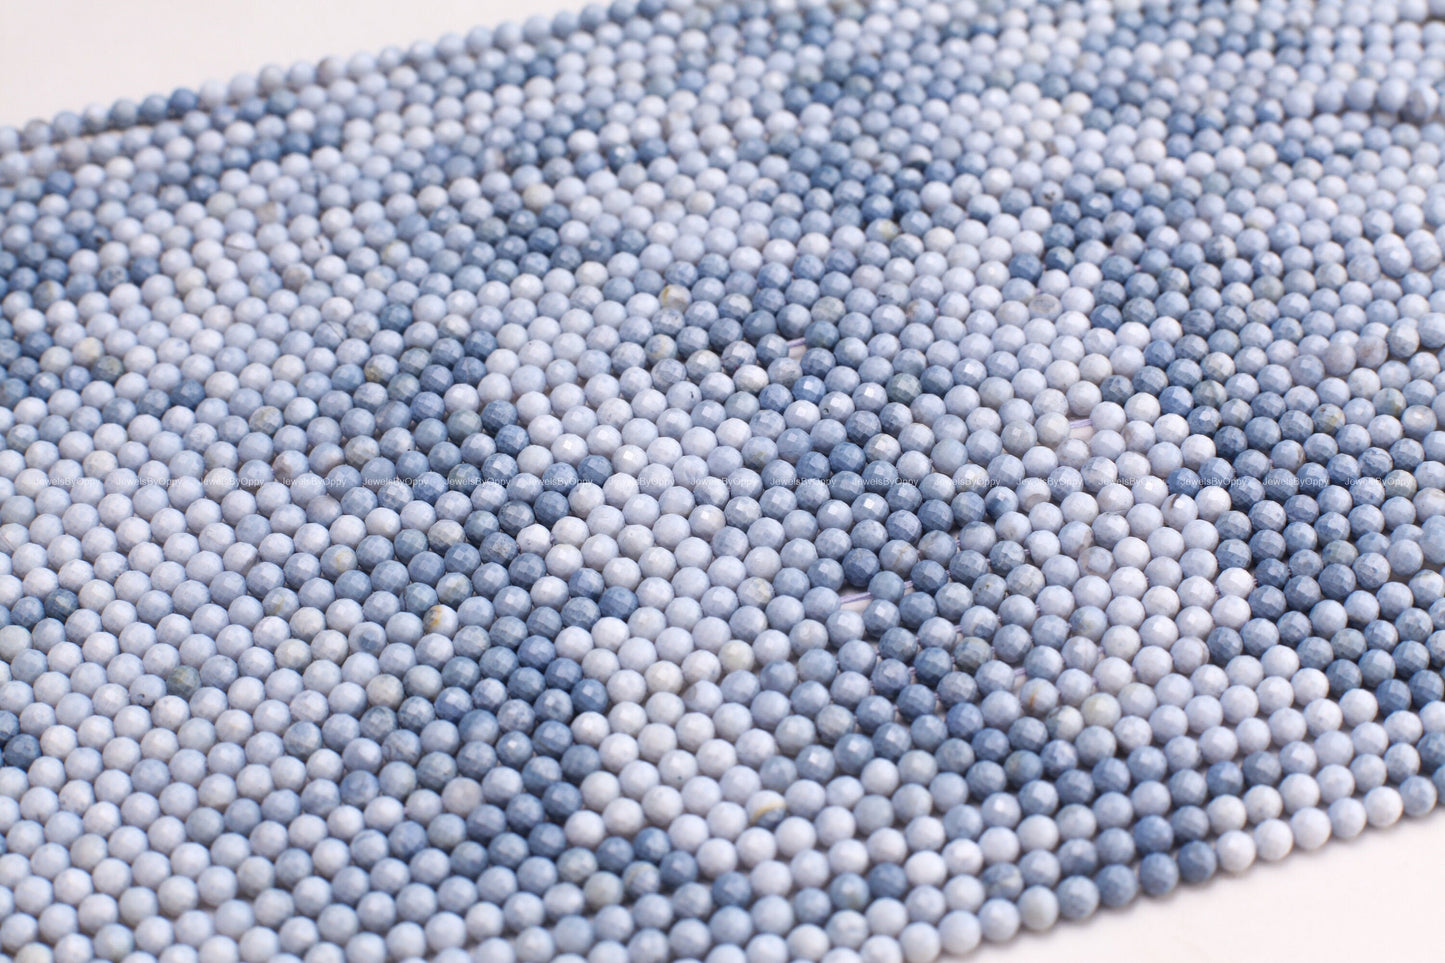 Blue Opal Round, Natural Shaded Peruvian blue Opal Faceted 4mm Round Jewelry Making Gemstone Beads 12.25” Strand, Boulder blue Andean Opal .